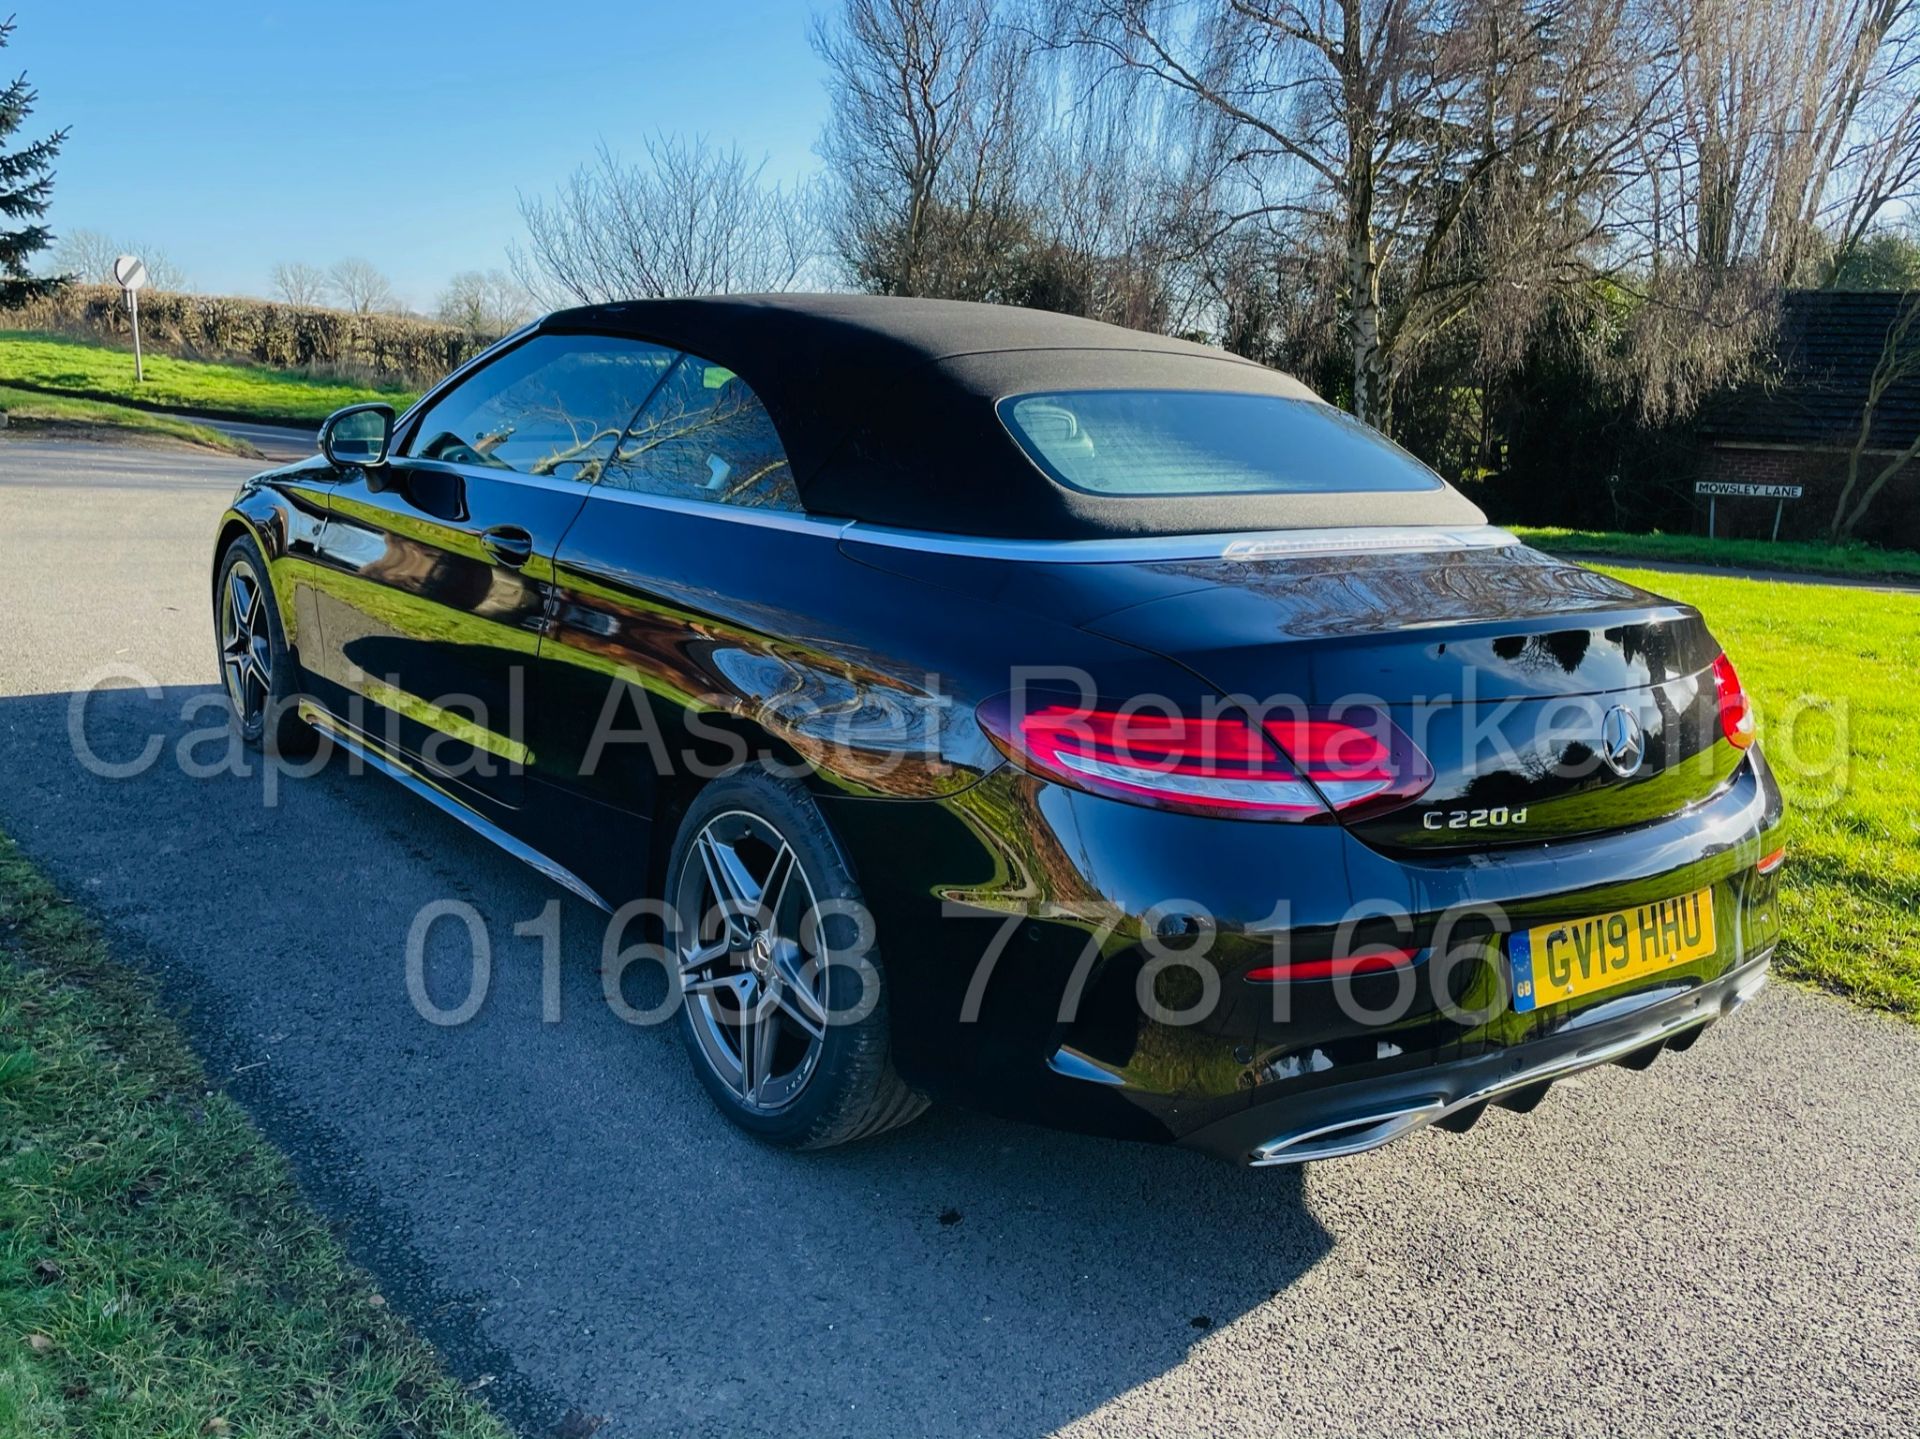 ON SALE MERCEDES-BENZ C220D *AMG LINE - CABRIOLET* (2019) '9G TRONIC AUTO - LEATHER - SAT NAV' - Image 12 of 59